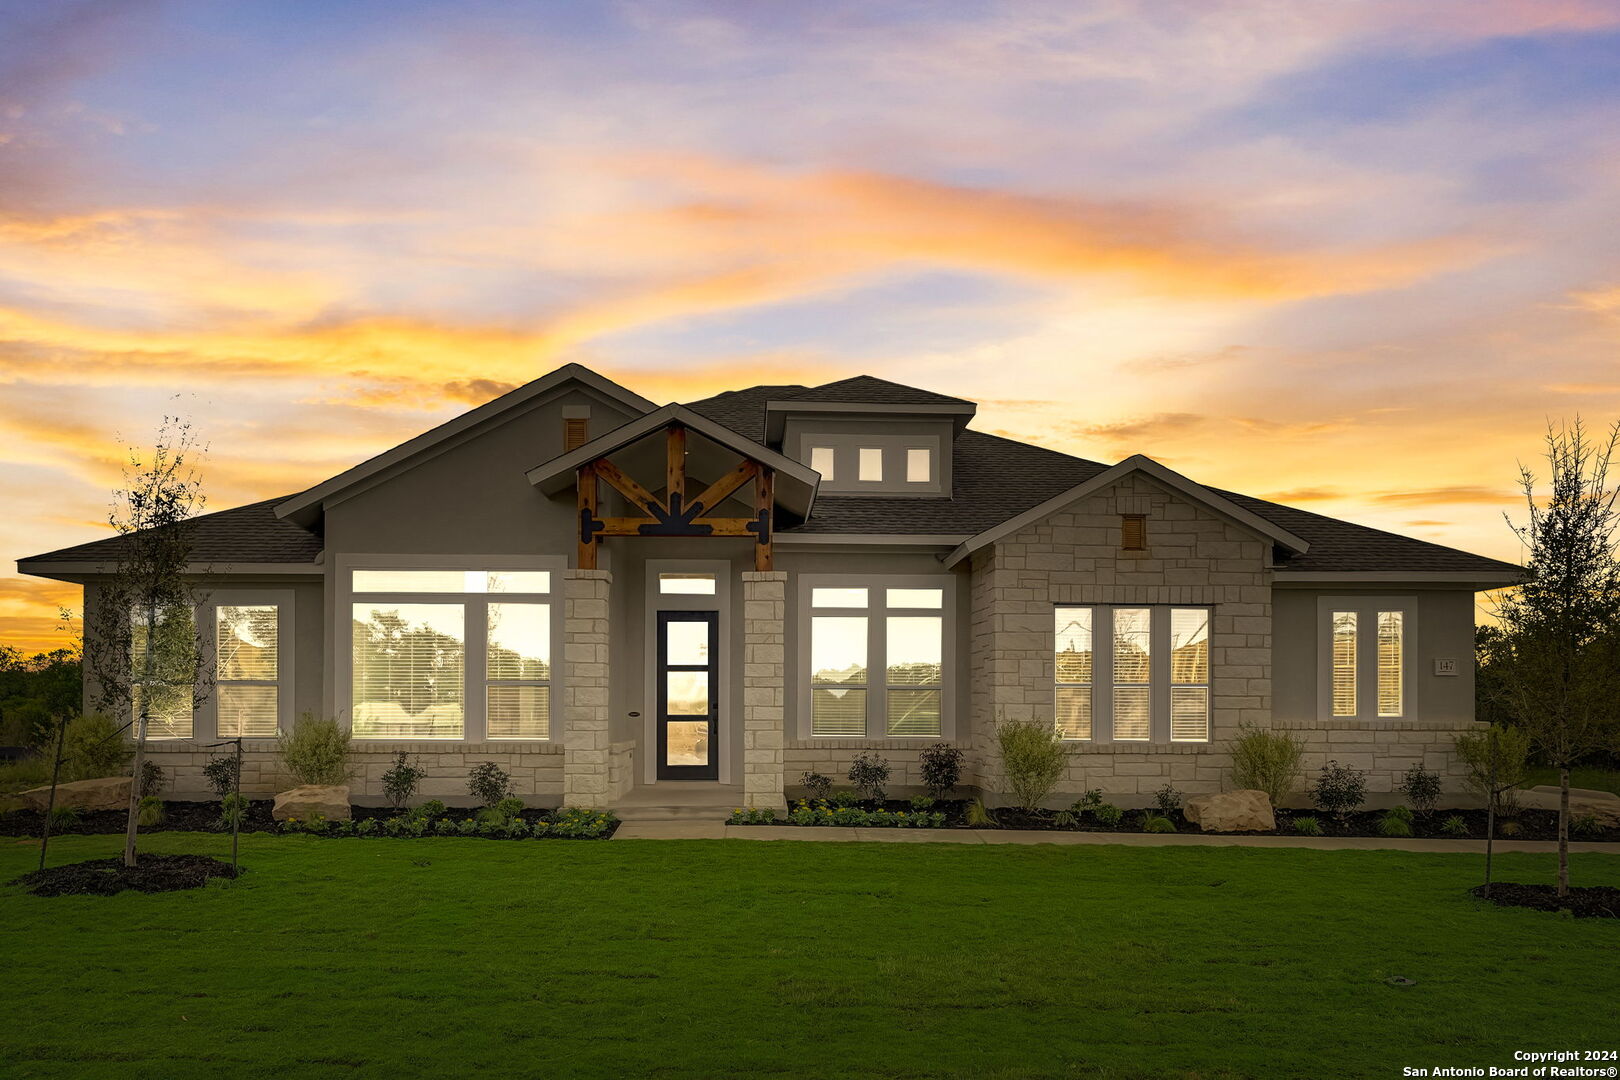 Photo of 147 Violet Wy in Castroville, TX